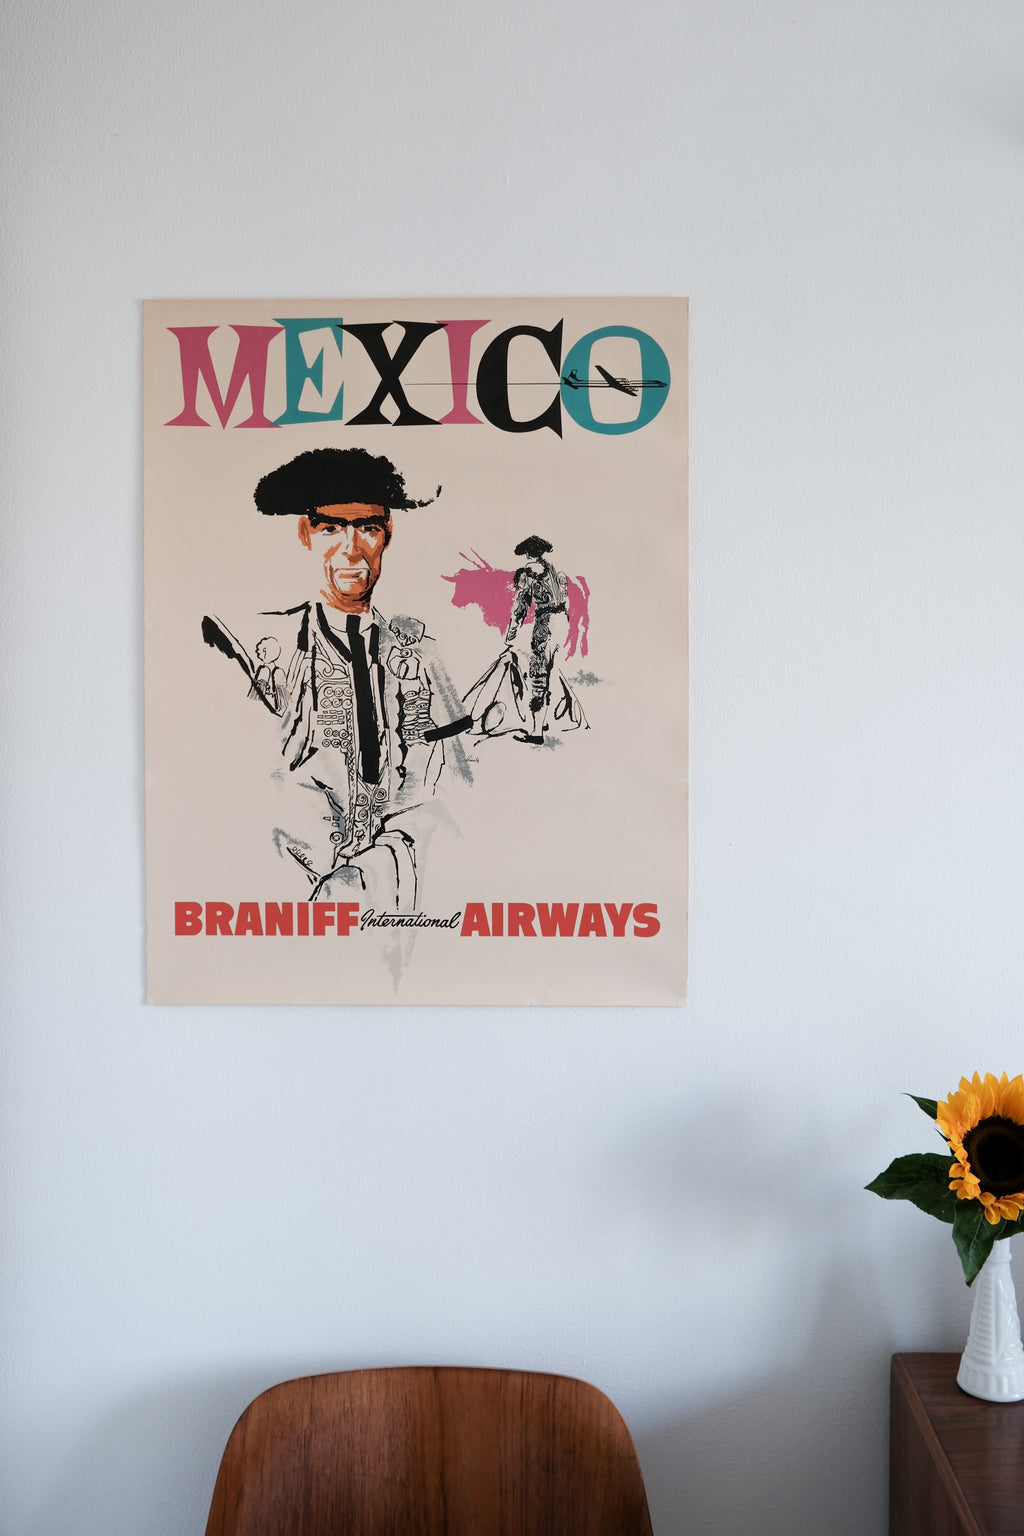 Braniff Airlines Mexico Poster 1950s